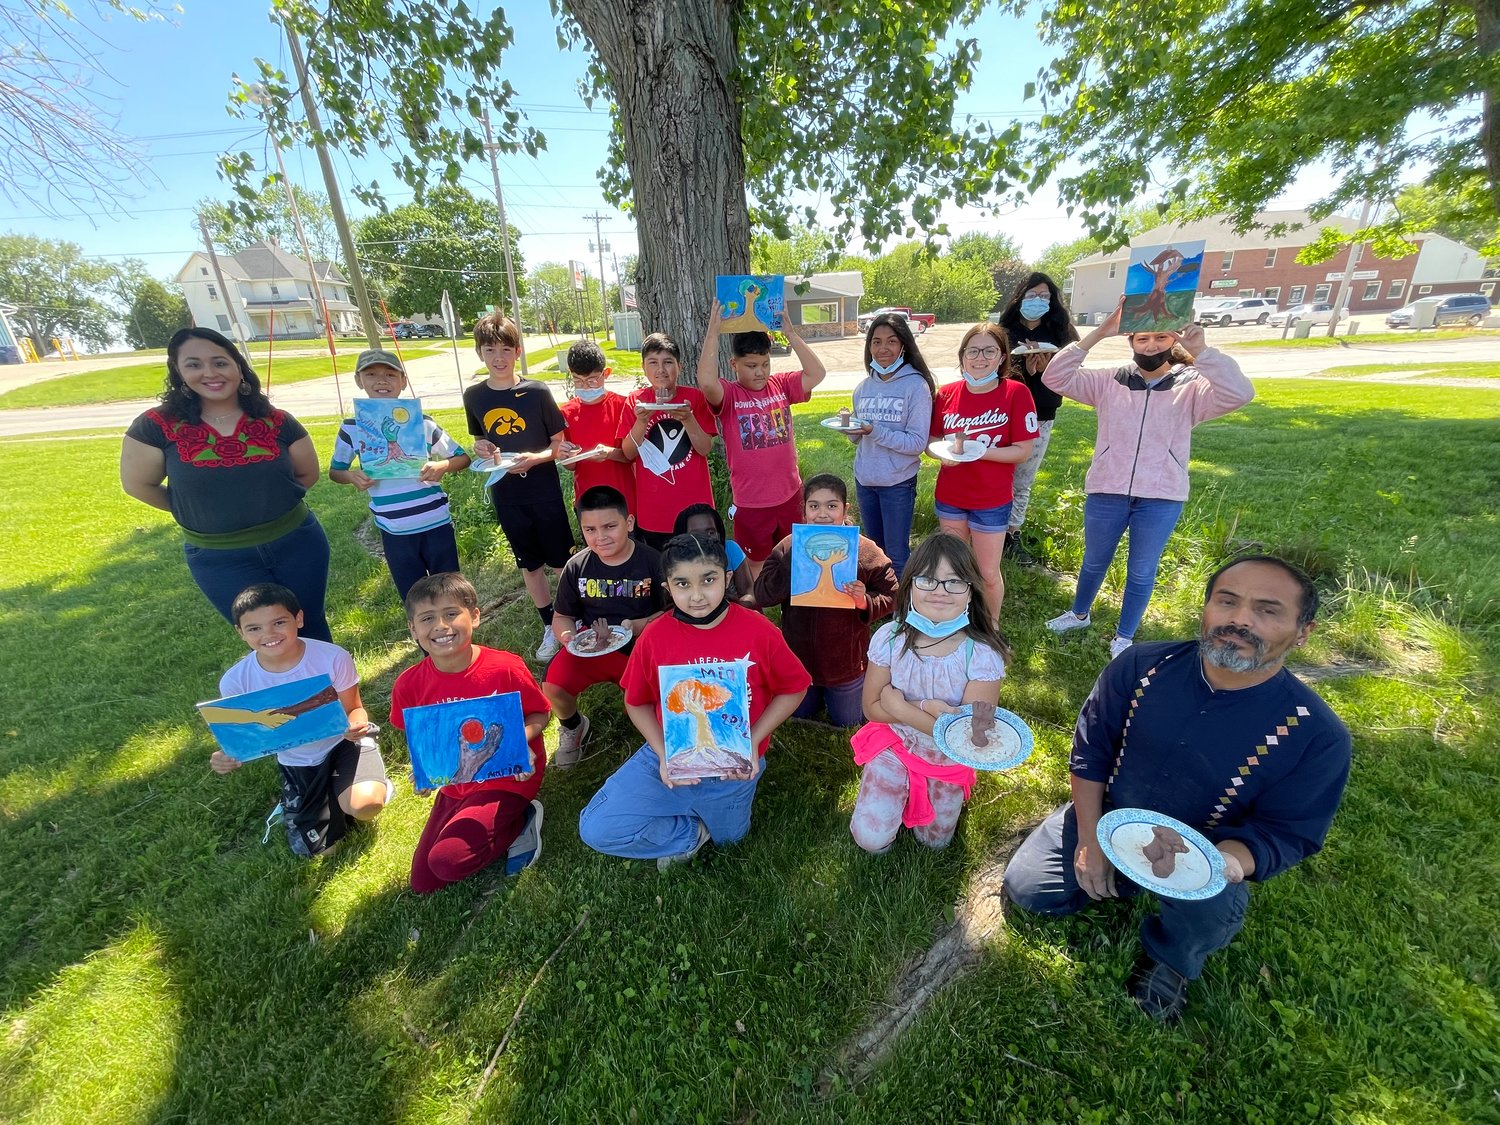 Los Dreamcatchers con sus obras de arte y Juan Chawuk
The West Liberty Youth Dream Catchers with their art pieces and Juan Chawuk, on right.